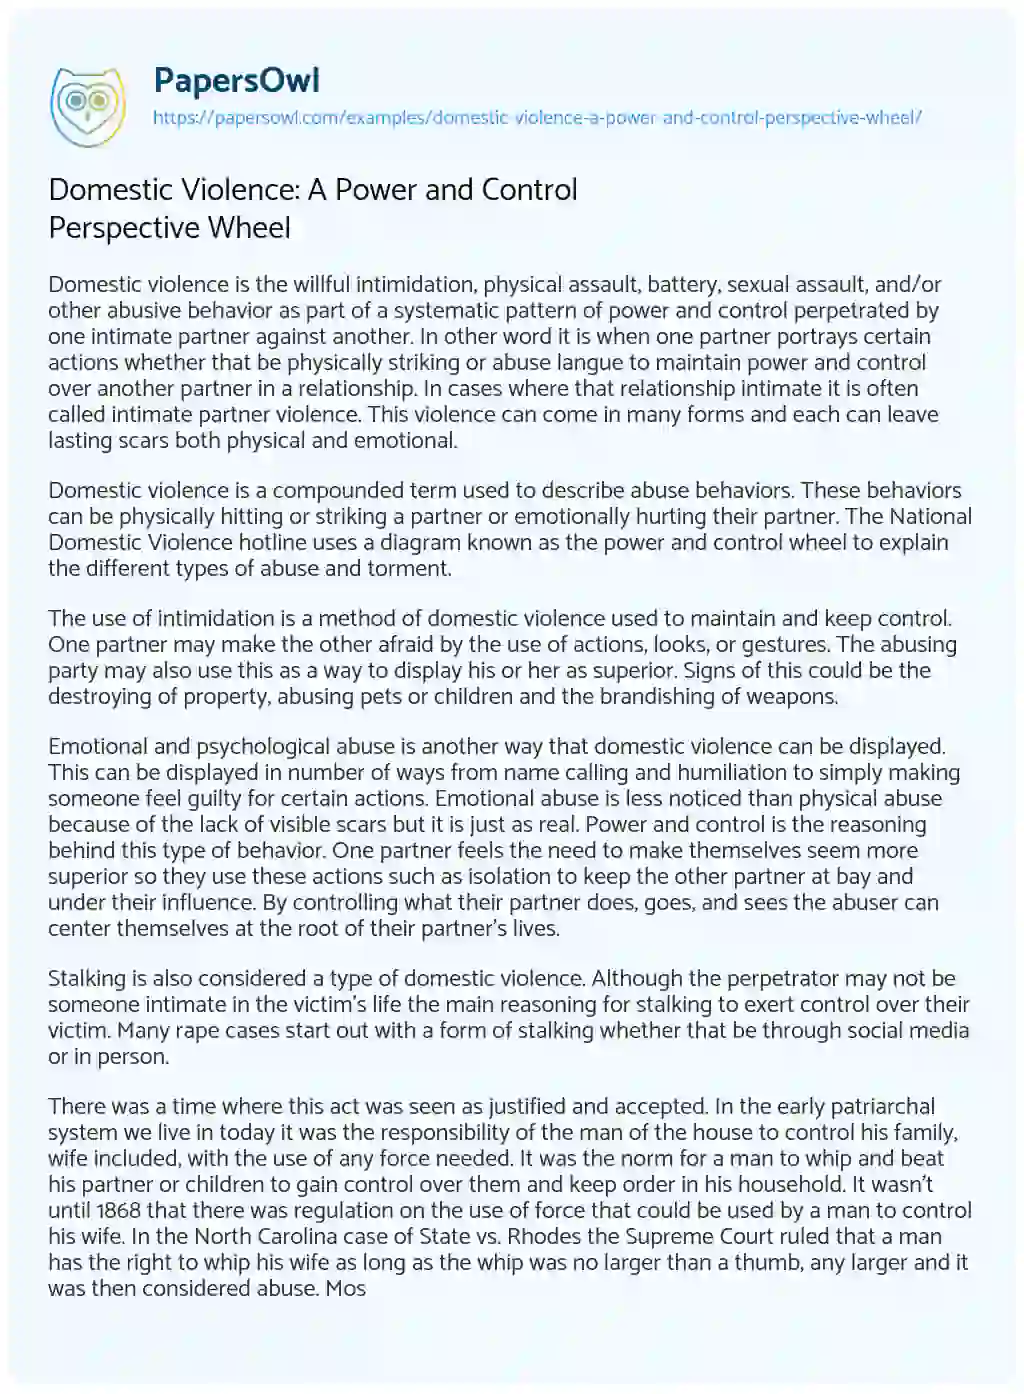 Domestic Violence: a Power and Control Perspective Wheel essay